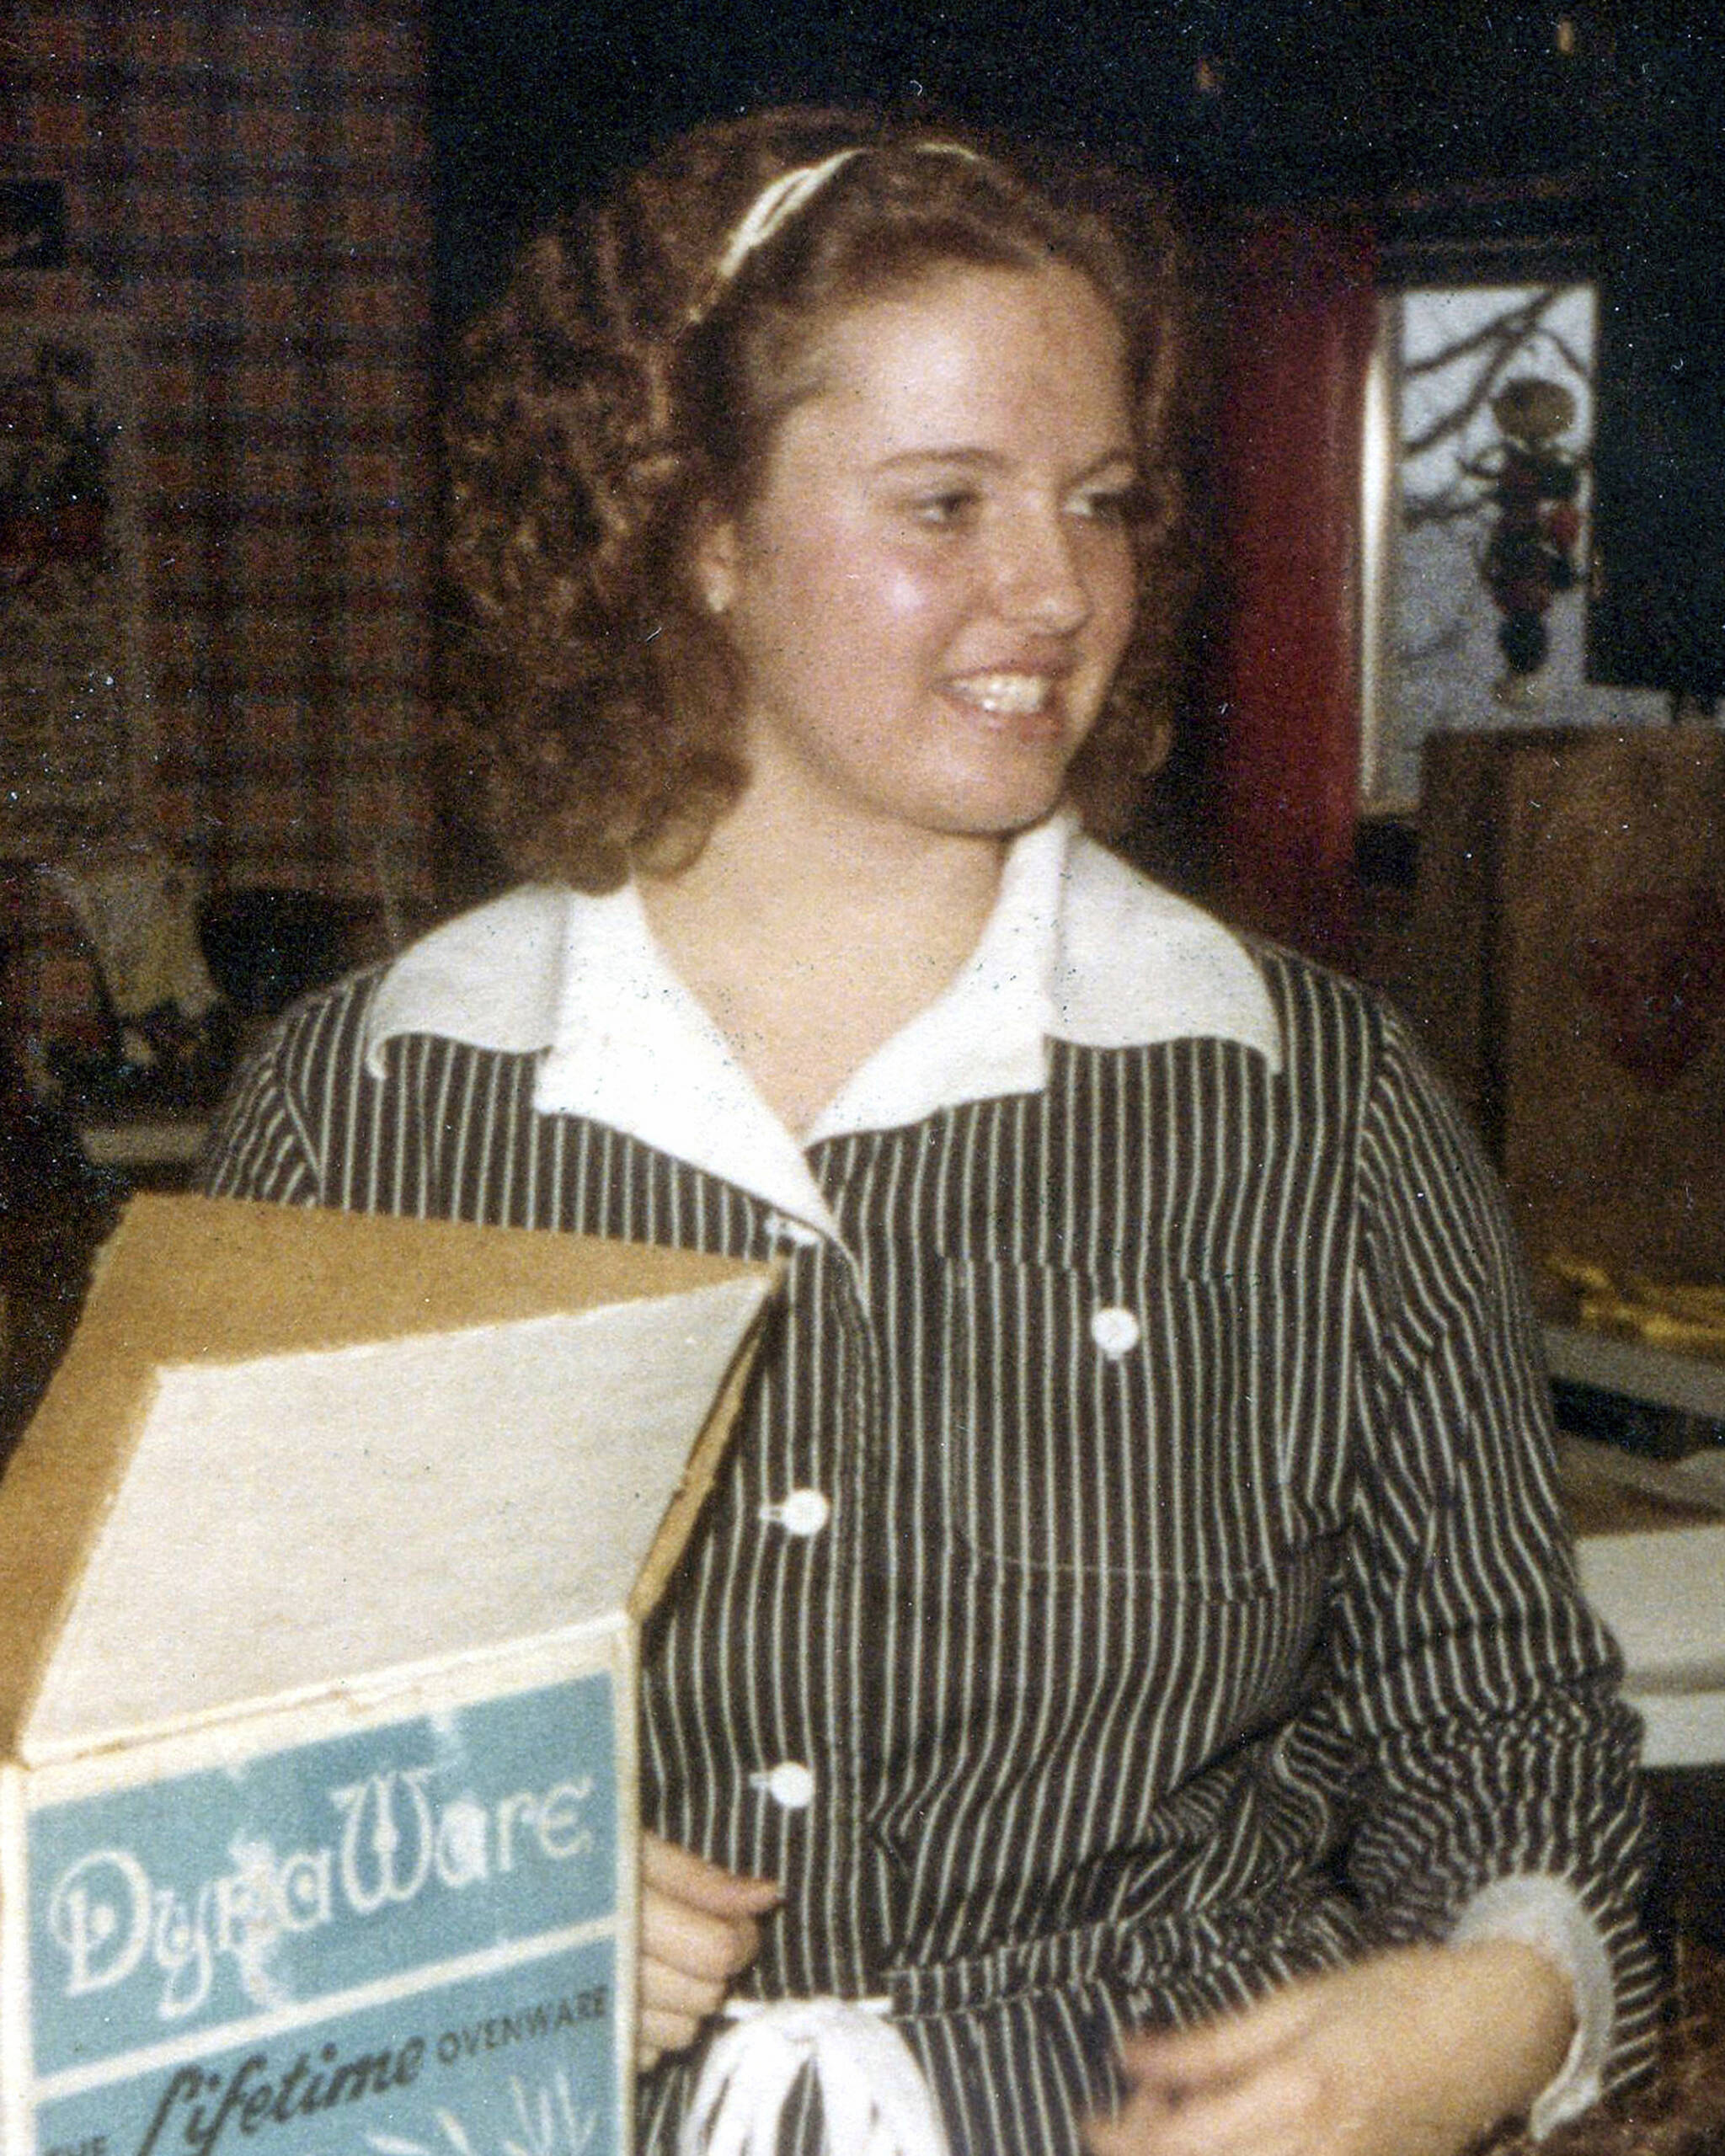 This undated photo released by the Alaska State Department of Public Safety shows Robin Pelkey just before her 18th birthday. The remains of a woman known for 37 years only as Horseshoe Harriet, one of 17 victims of a notorious Alaska serial killer, have been identified through DNA profiling as Robin Pelkey, authorities said Friday, Oct. 22, 2021. (Alaska State Department of Public Safety via AP)